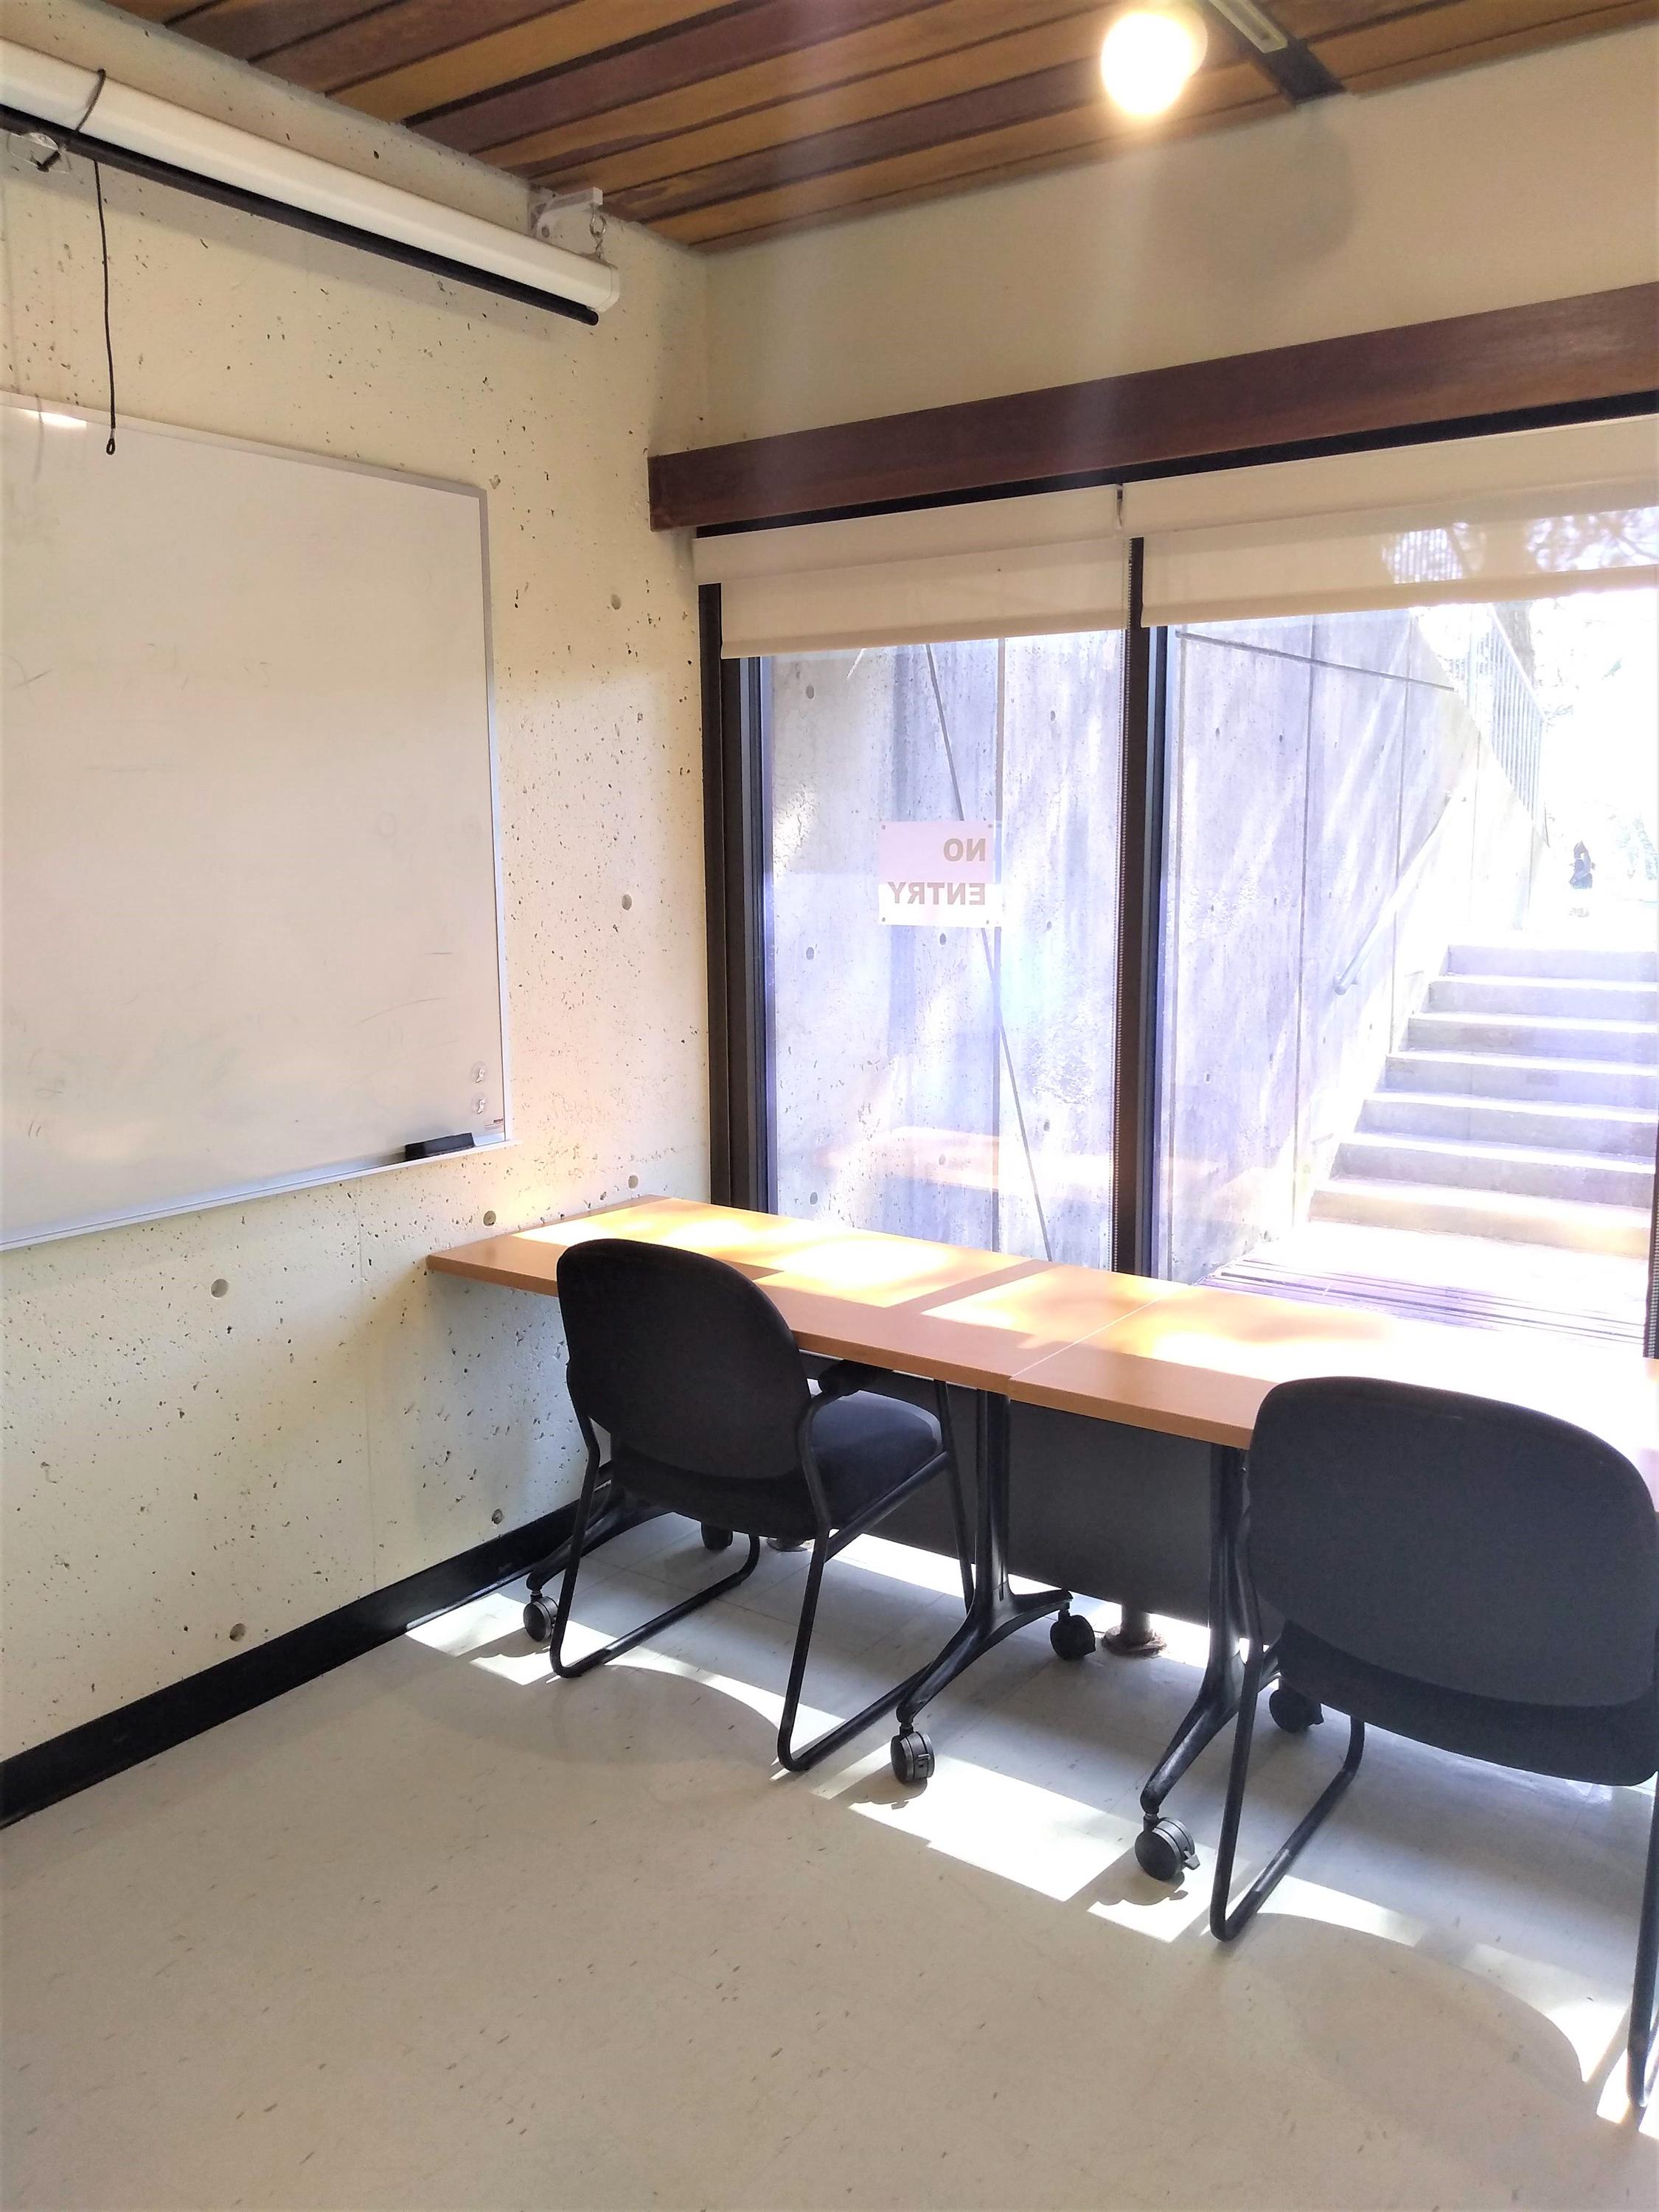 The left side of the room has a whiteboard, a projector and projector screen, and an exit door leading to an outdoor patio.